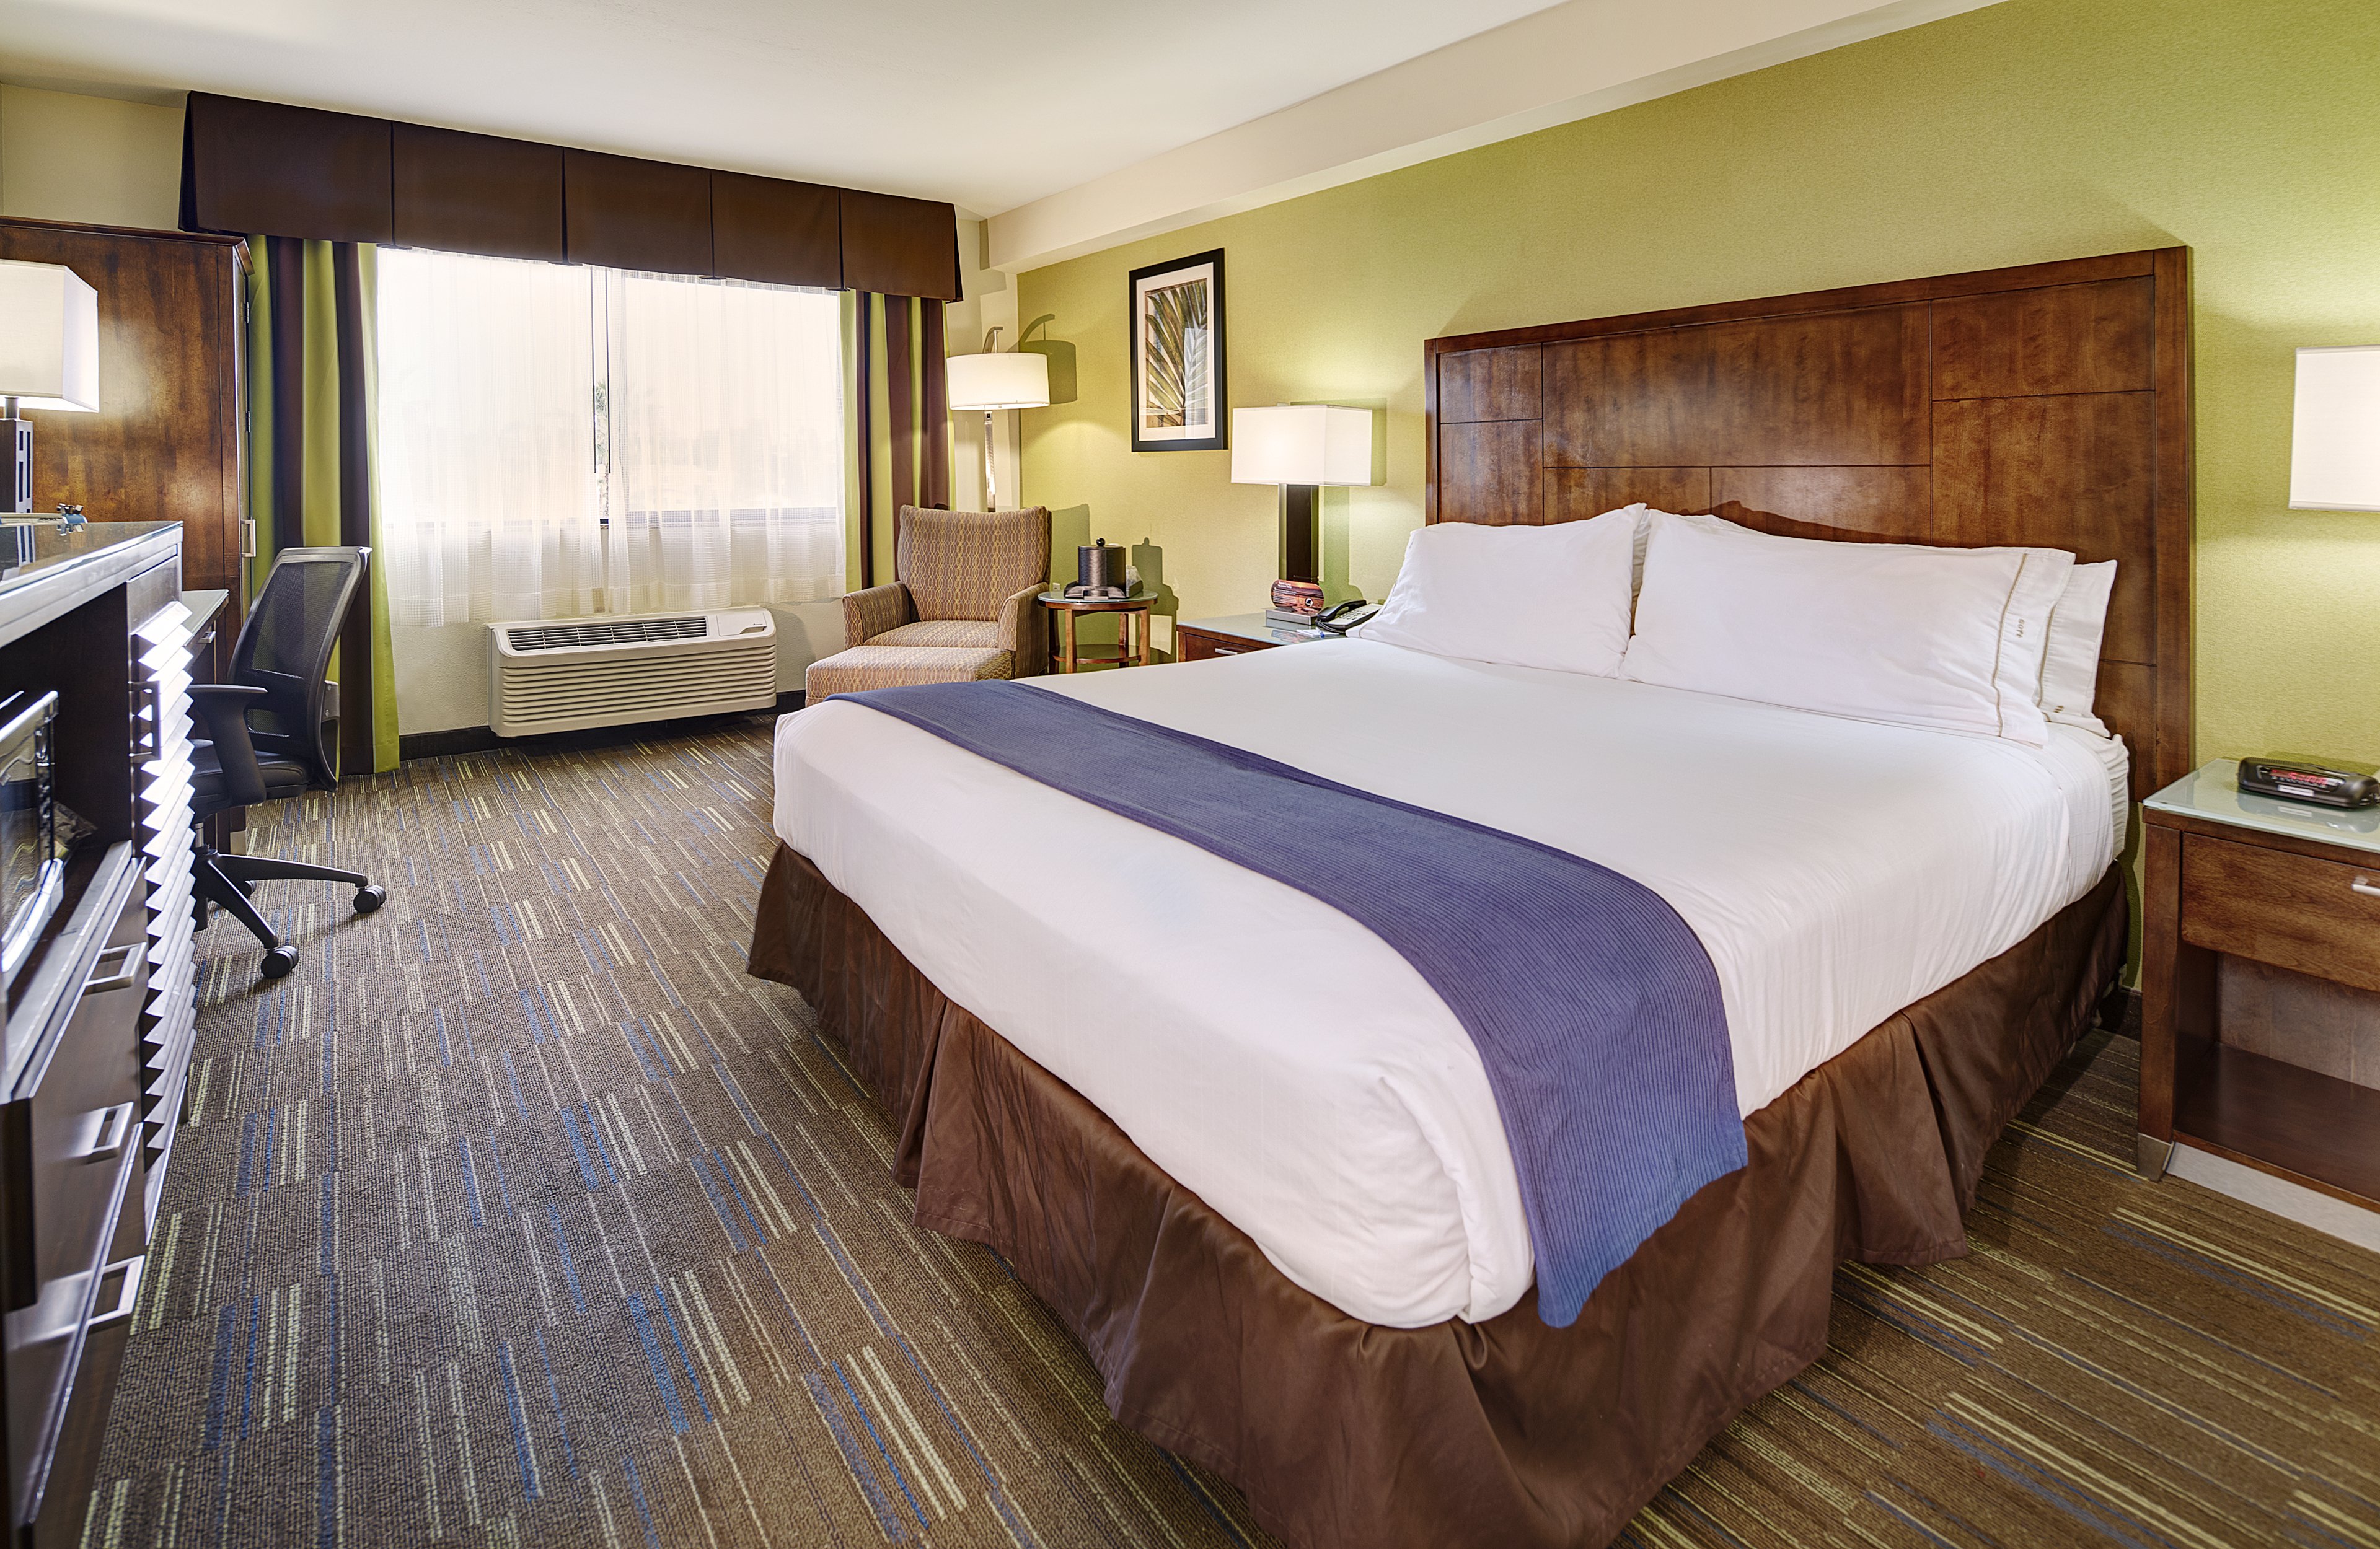 Enjoy the comfort of a King size bed at our National City hotel.